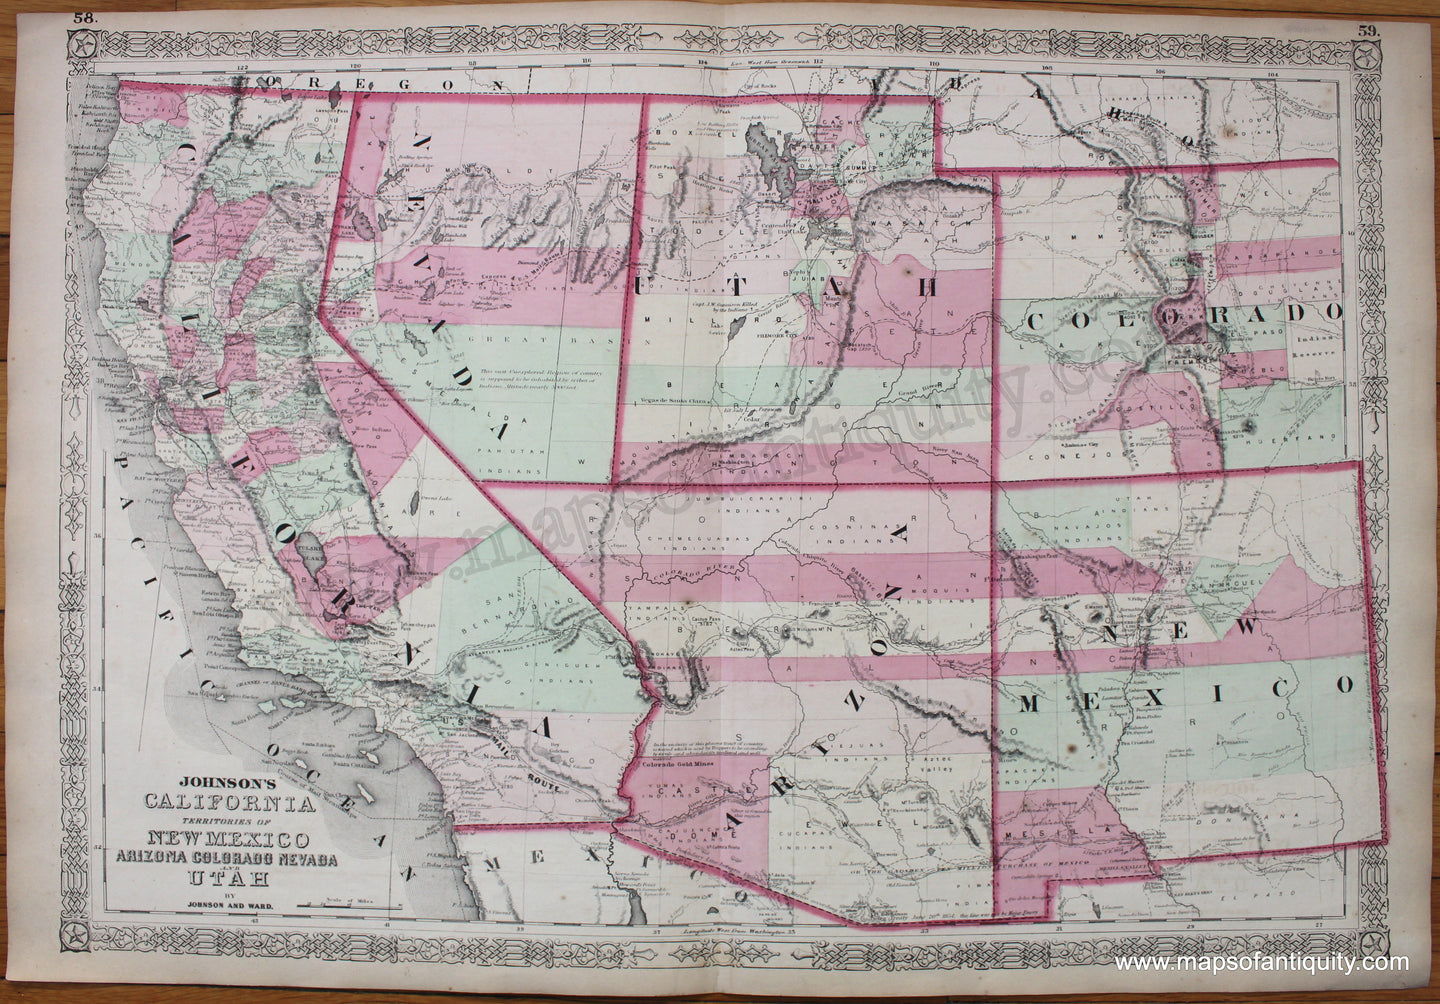 Antique-Hand-Colored-Map-Johnson's-California-with-Territories-of-Utah-Nevada-Colorado-New-Mexico-and-Arizona.--United-States-West-General-1864-Johnson-and-Ward-Maps-Of-Antiquity